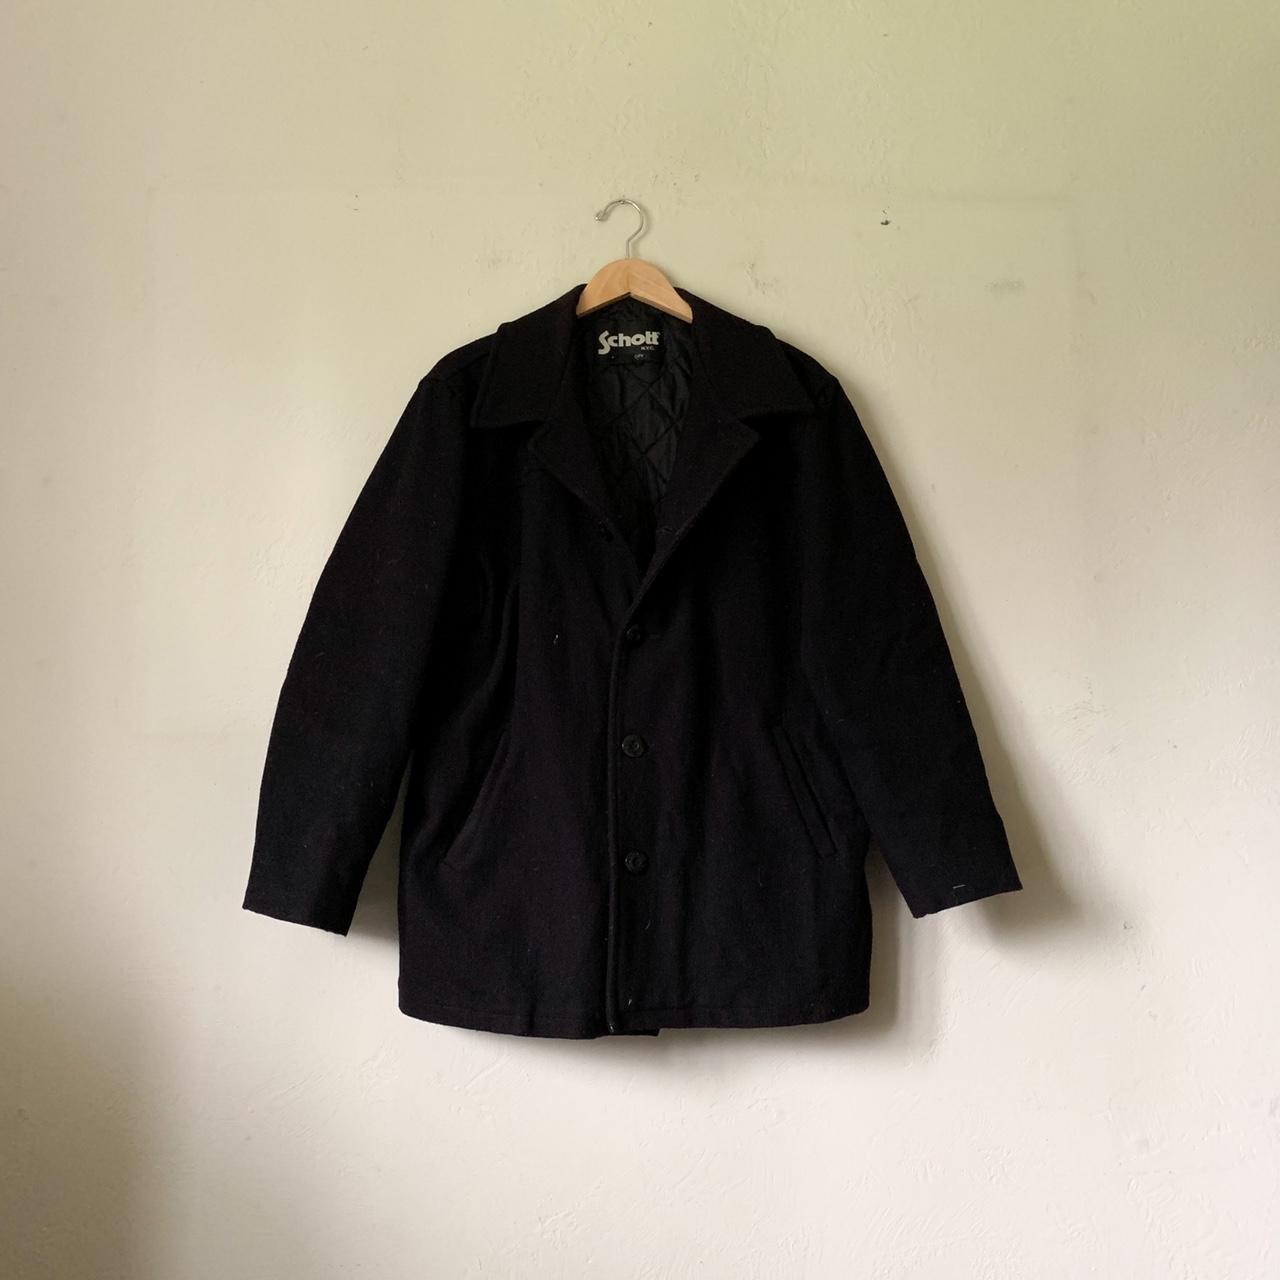 Product Image 1 - Vintage Schott Black Wool Overcoat

Tagged